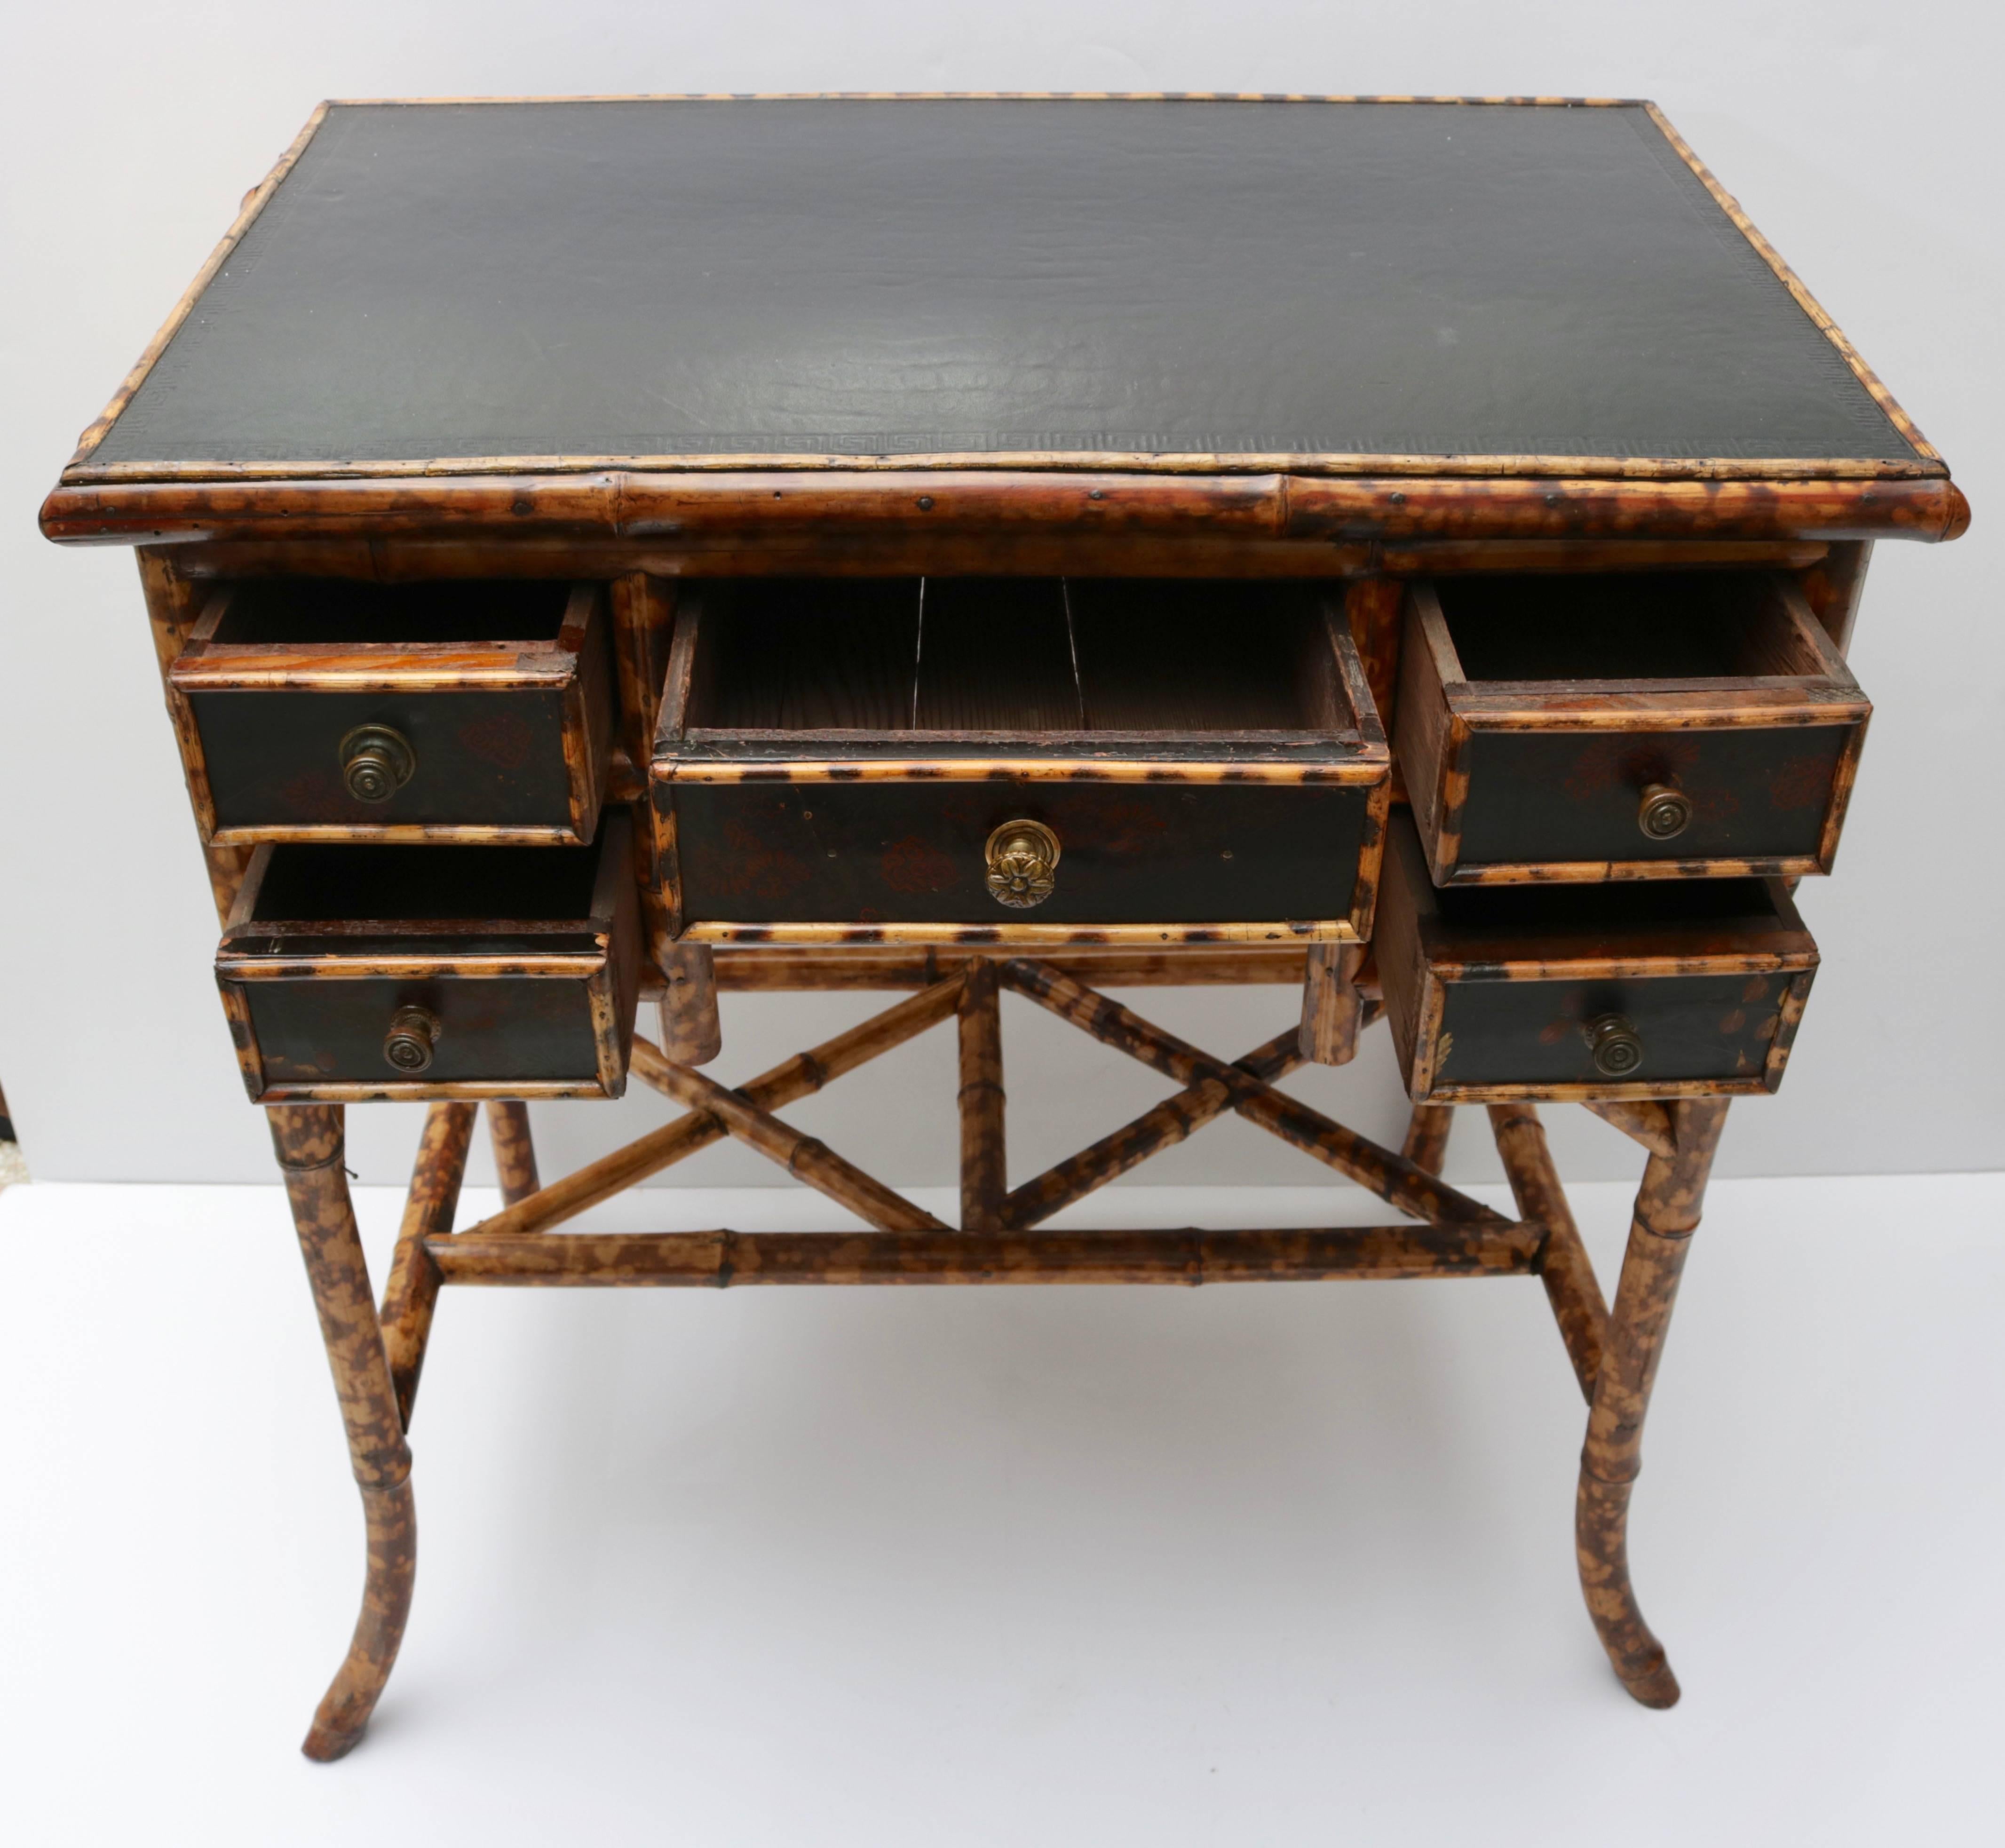 This stylish desk was recently purchased in London and has been restored to its full glory with its tortoise bamboo frame, black leather top and lacquered drawer fronts.
 
For best net trade price or additional questions regarding this item,